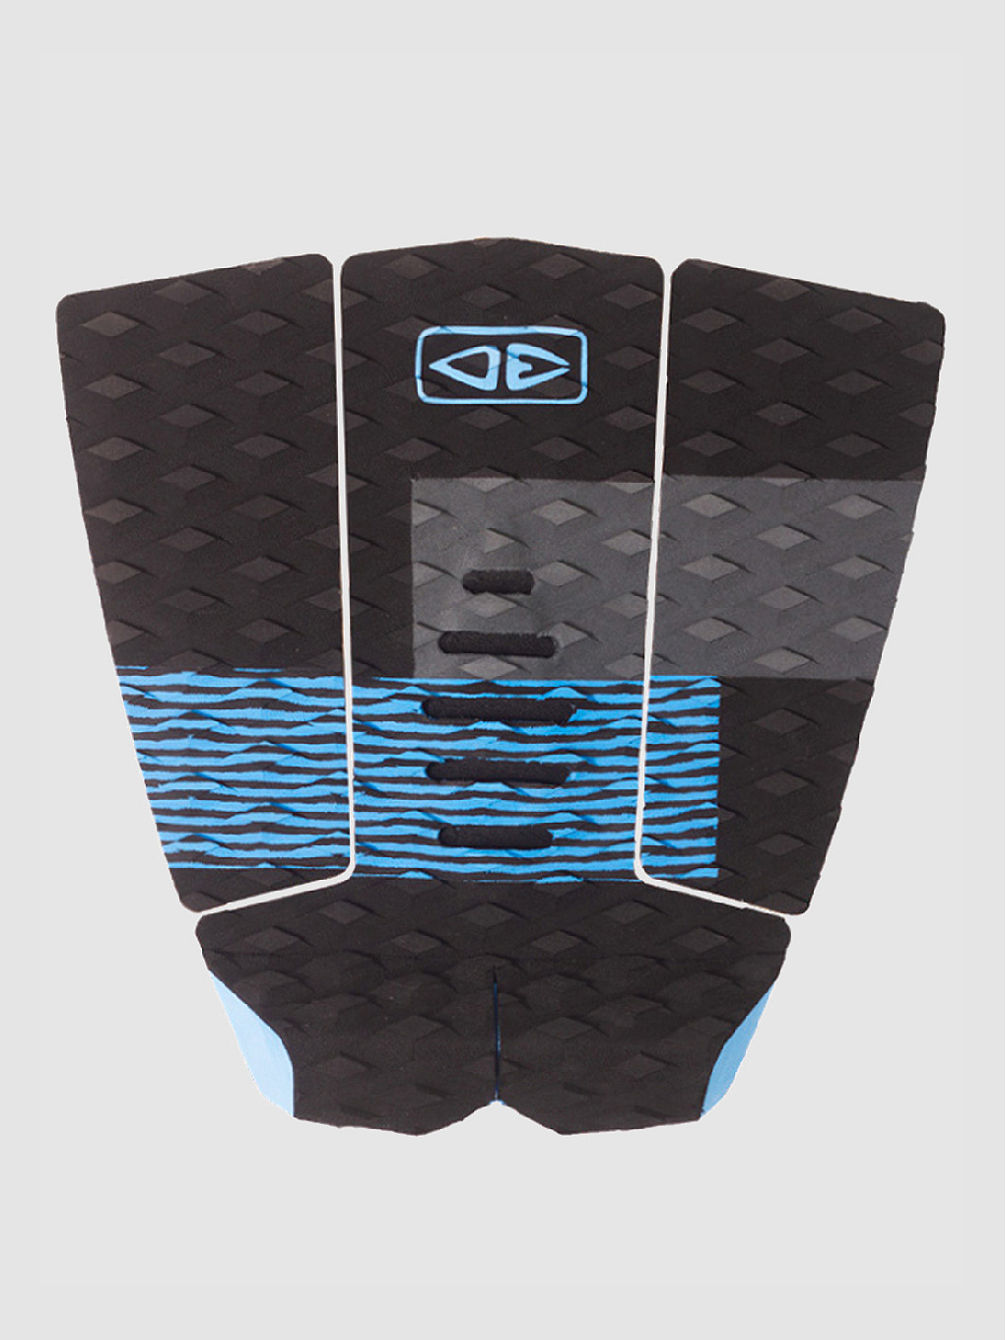 Owen Wright Traction Pad